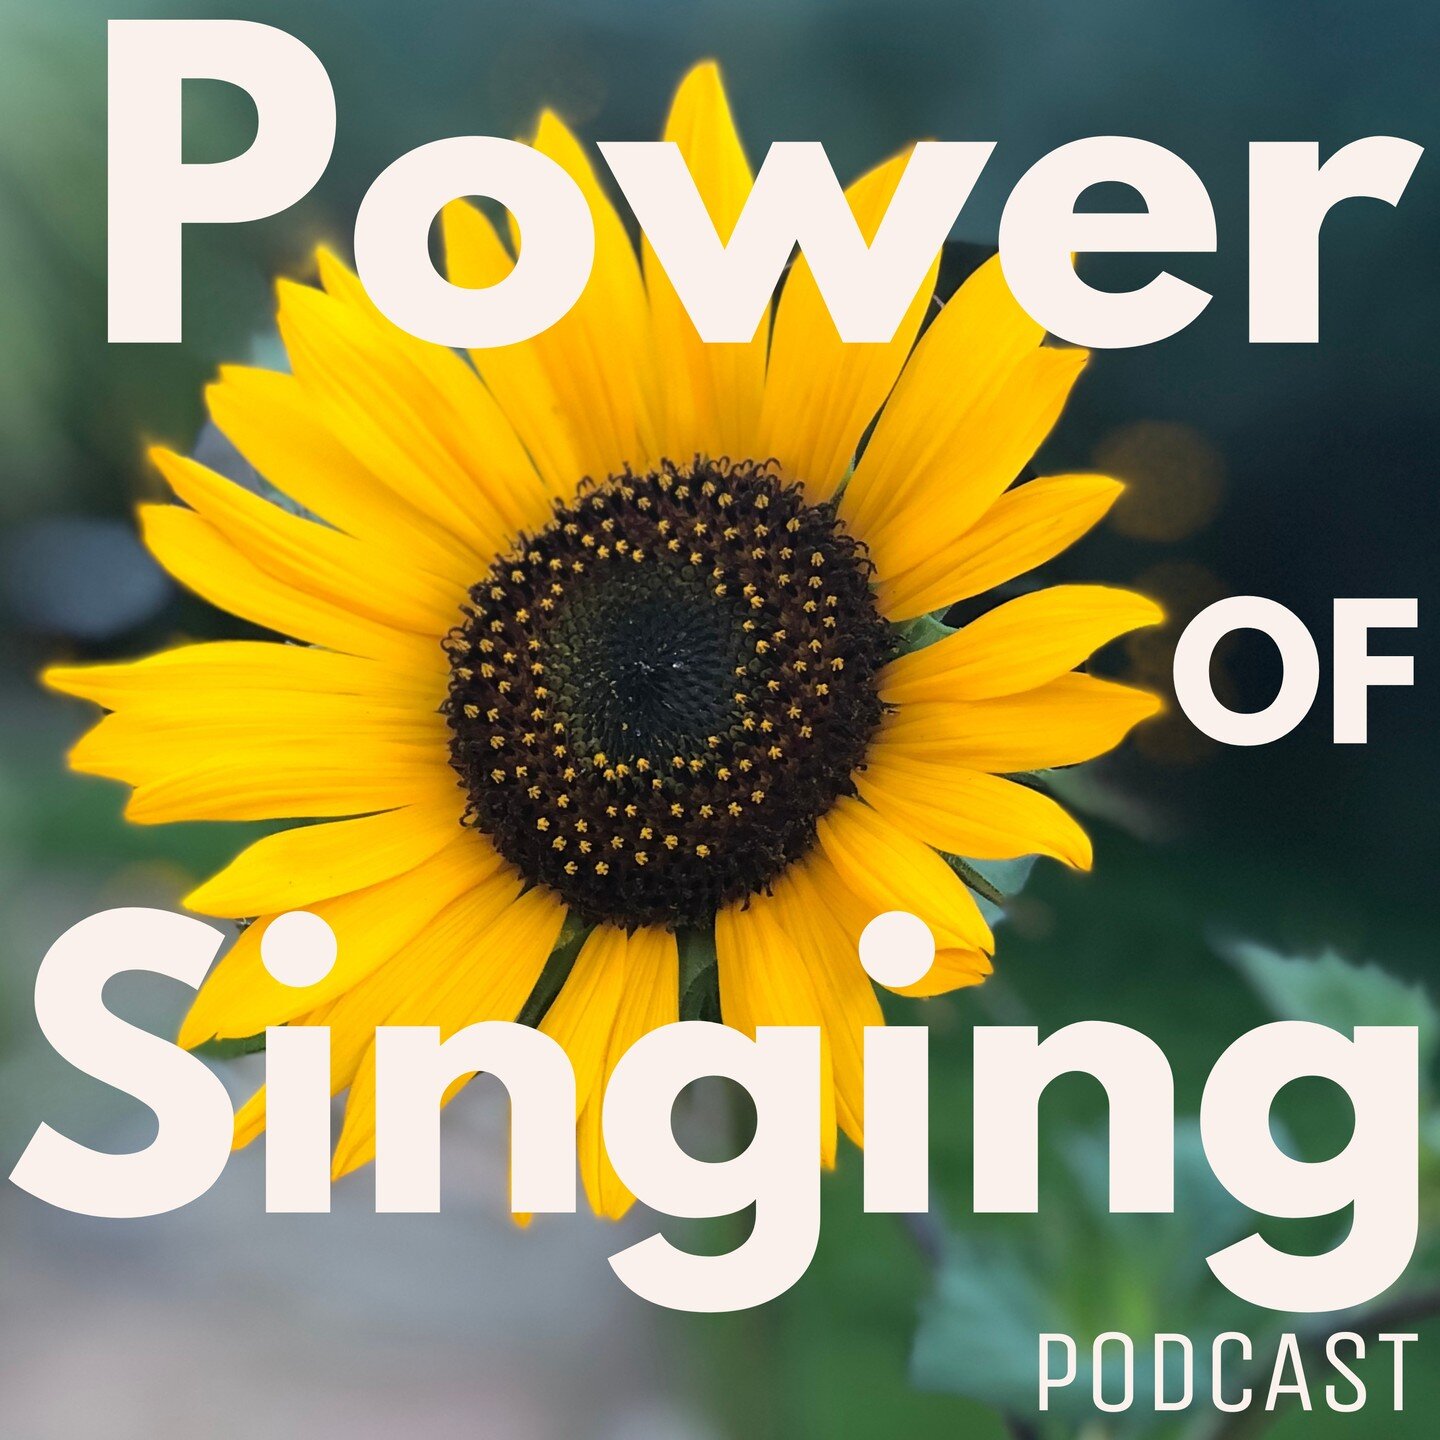 Hello Singers! You are invited to join the Santosha Voice Group - live on Zoom on Wednesday, August 24 at 10 am Pacific Time. This is a follow up to Episode #2 of our podcast: THE POWER OF SINGING which aired on August 9. Take a listen wherever you g